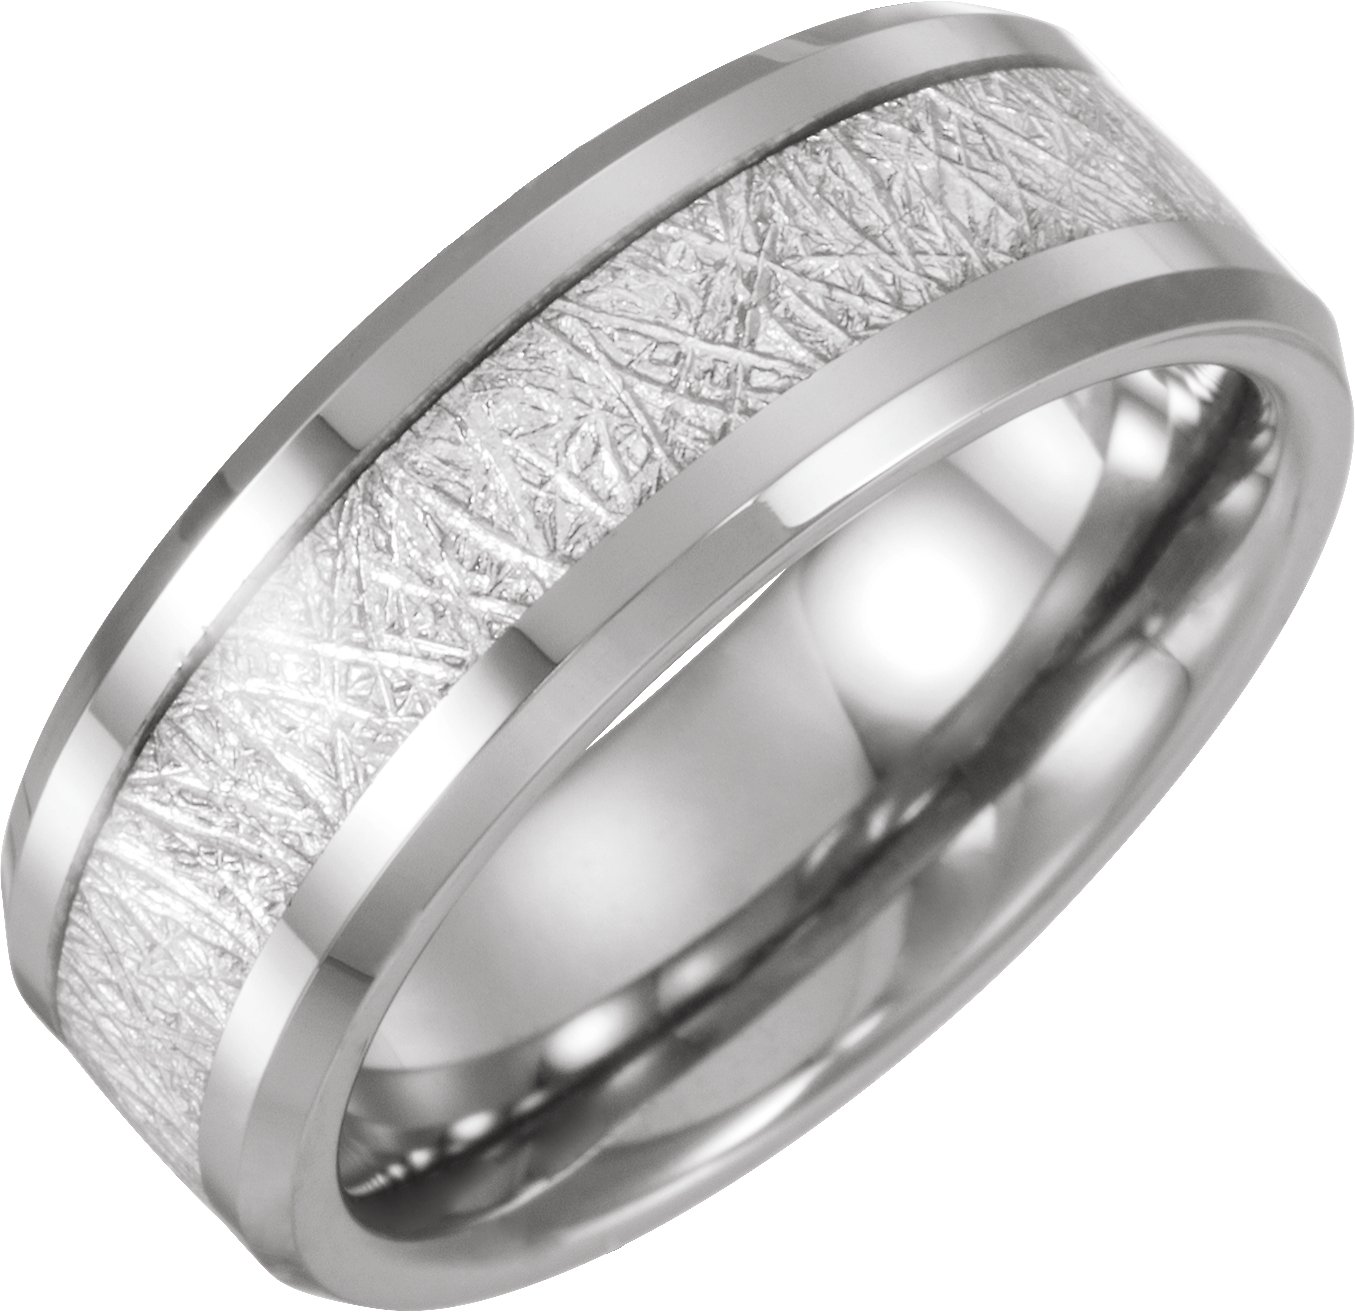 Tungsten Band with Imitation Meteorite Inlay Size 11.5  